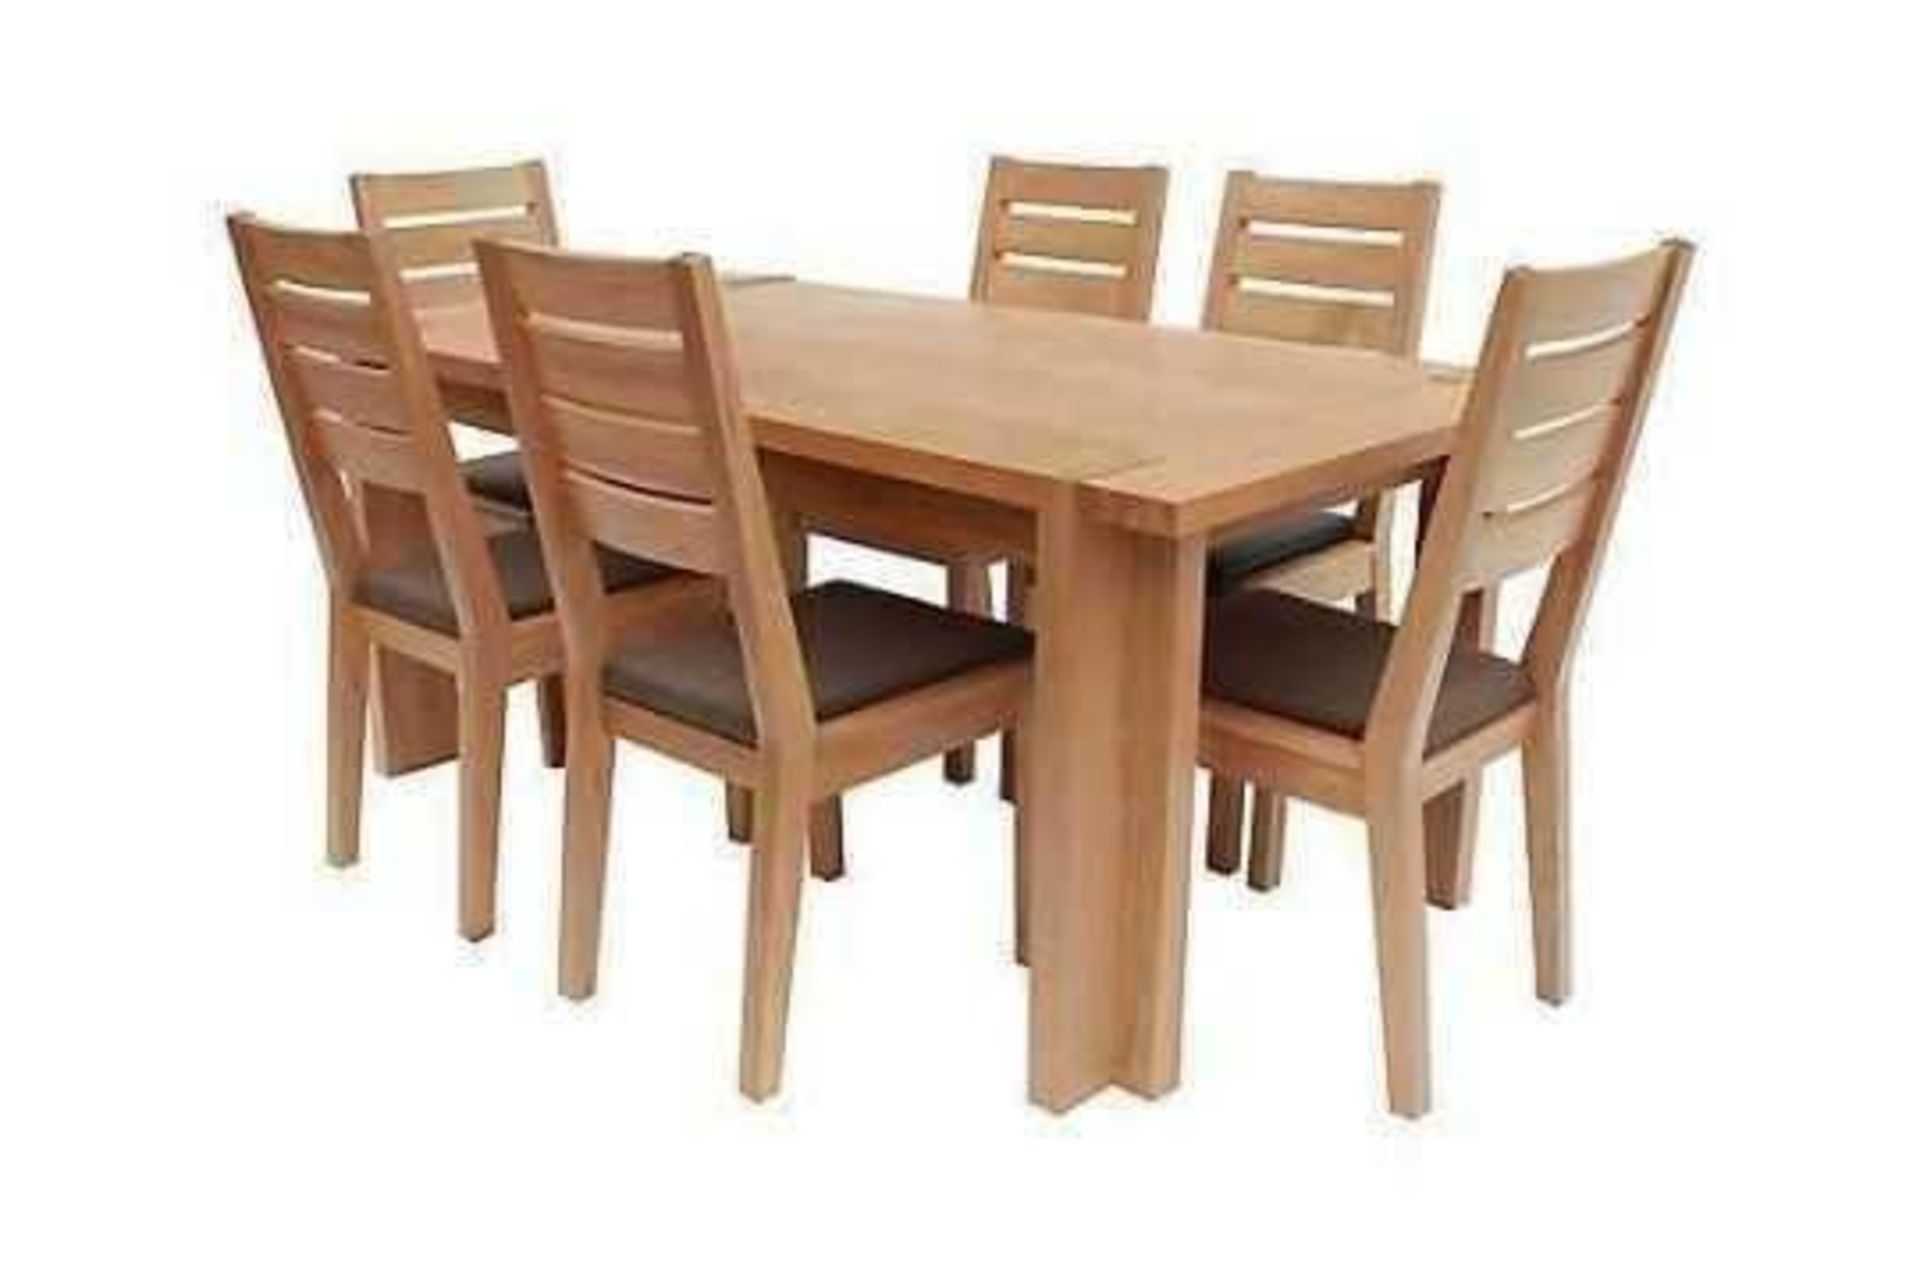 RRP £699, Sourced From Harveys Furniture, Boxed Claremount Dark Oak Dining Table (Chairs Not